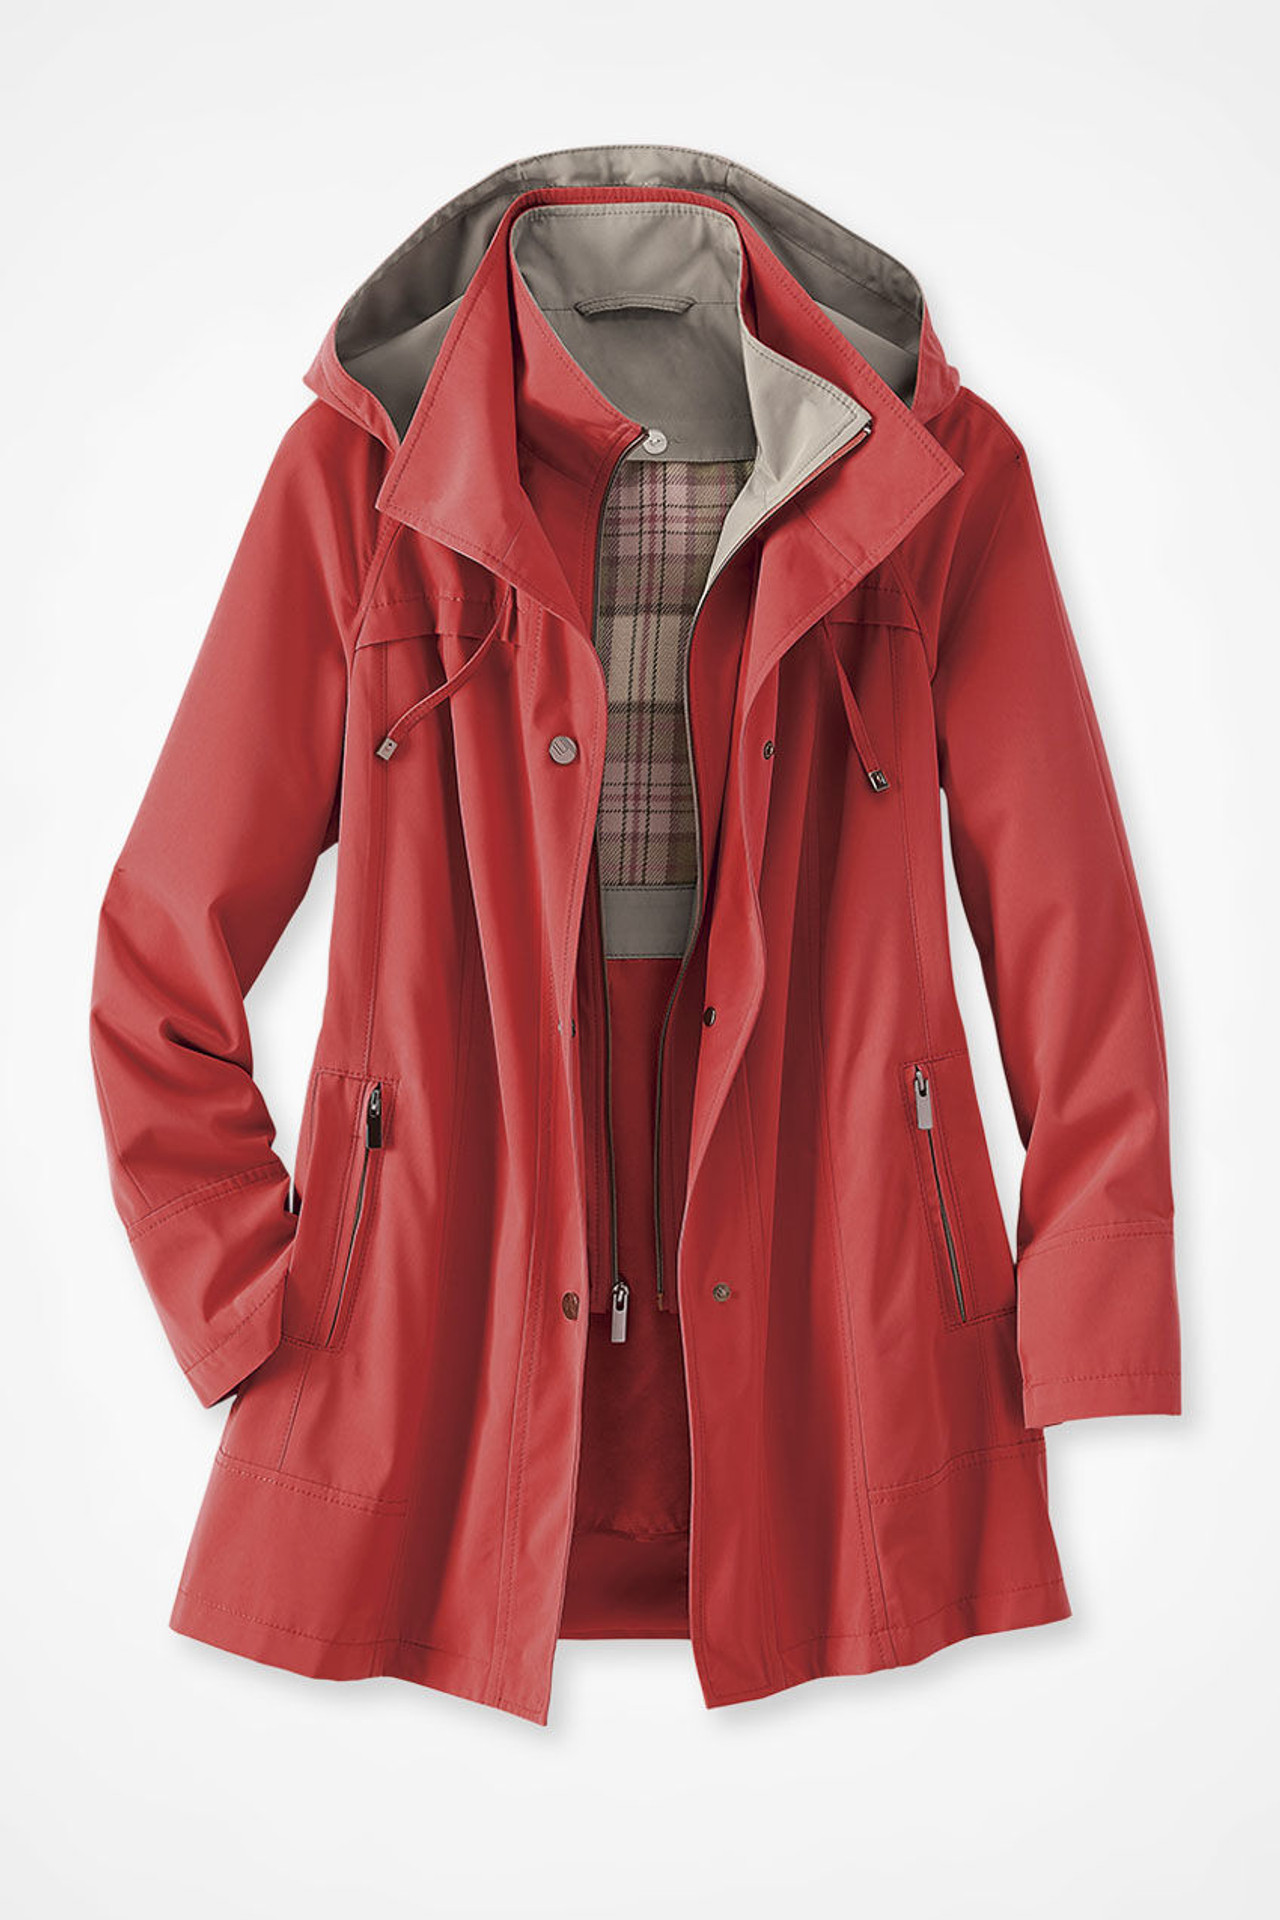 All-Season Jacket - Coldwater Creek Outlets